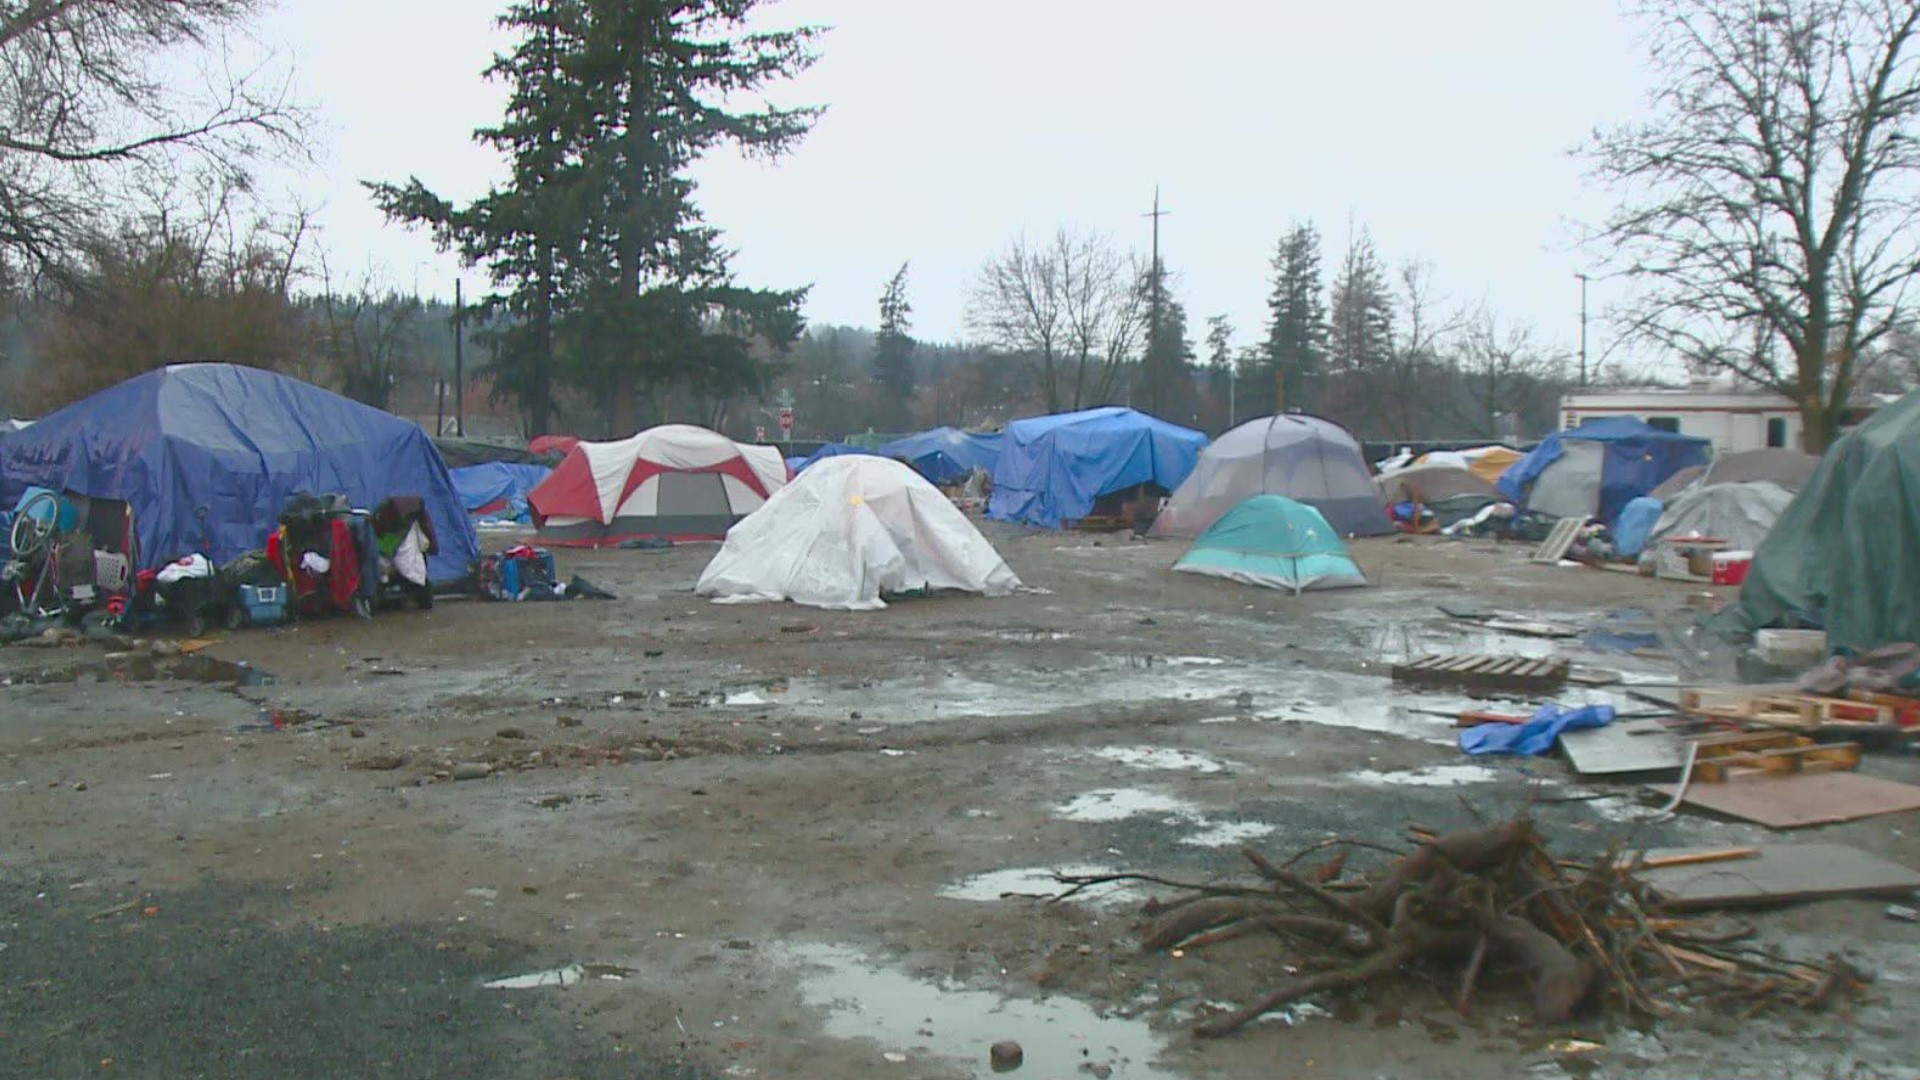 A status conference for a lawsuit over clearing the I-90 homeless camp in Spokane is scheduled for today.